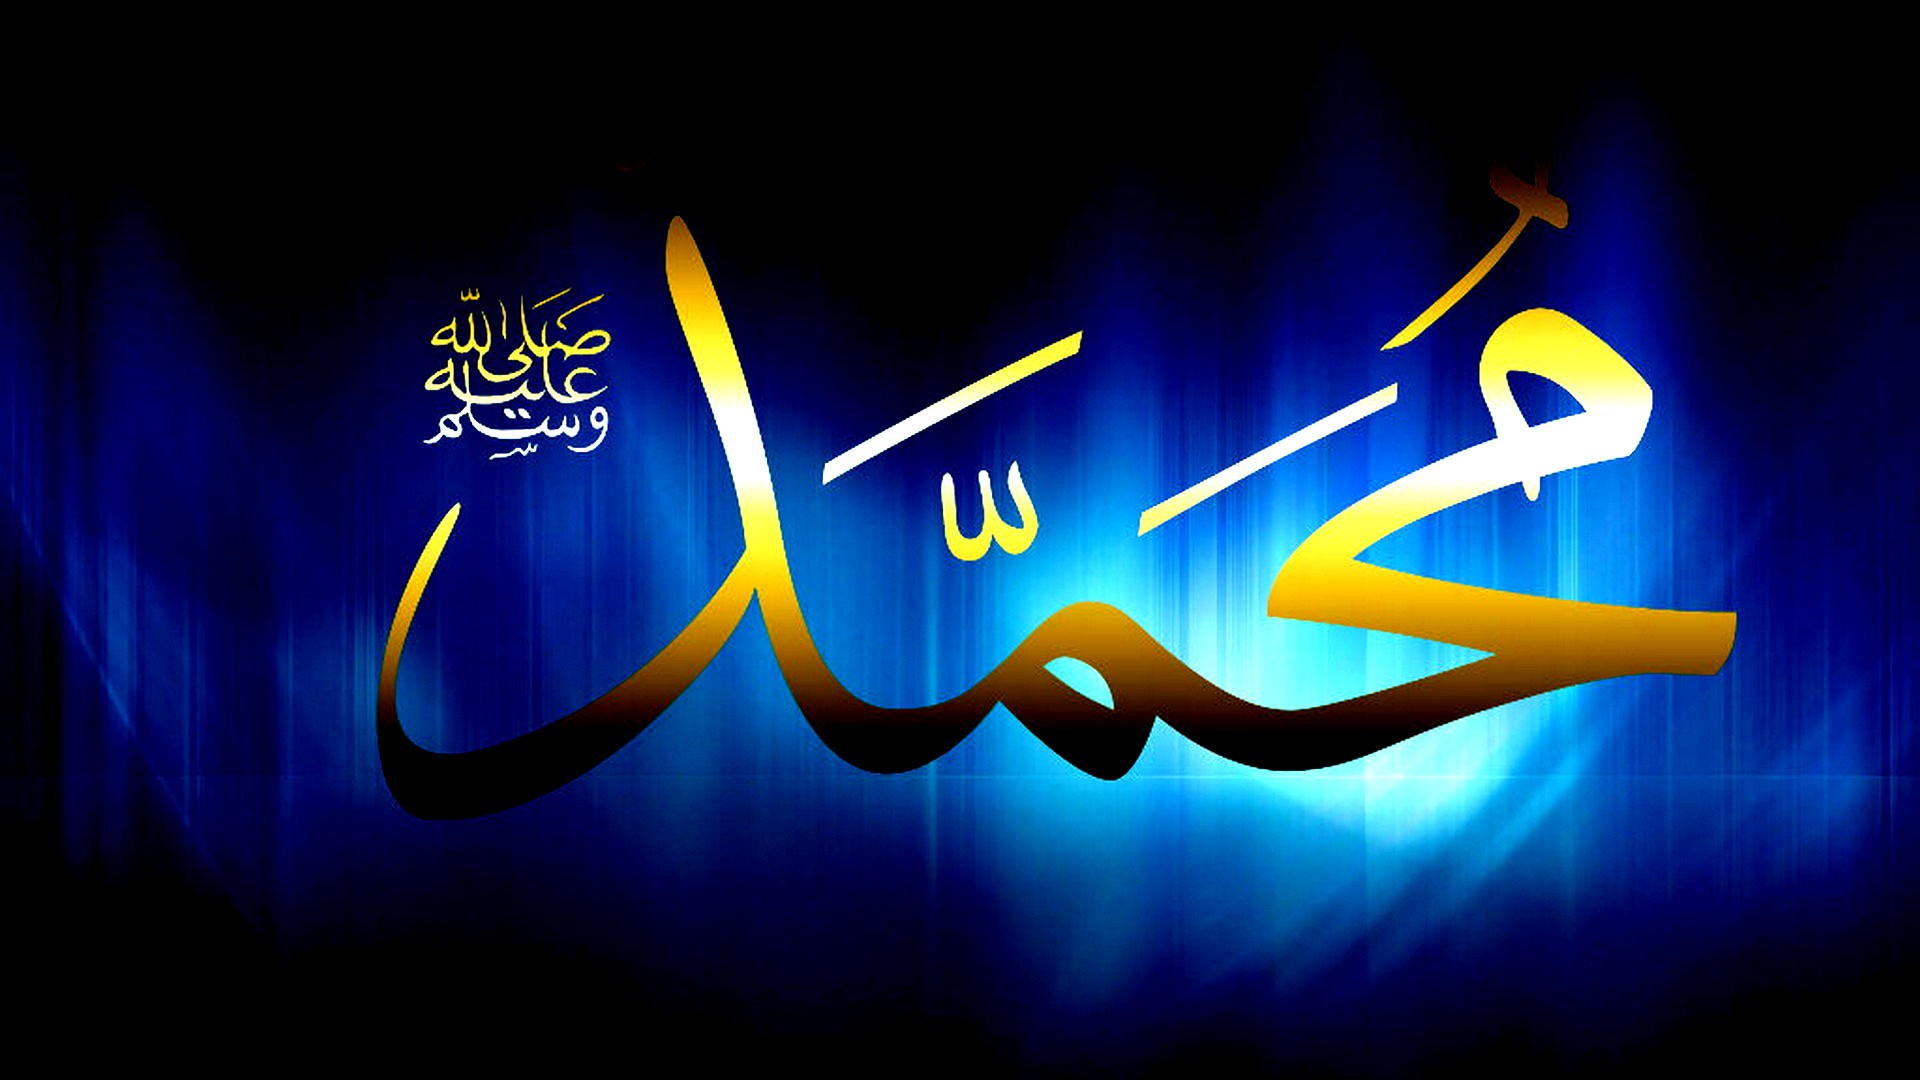 Muhammad Desktop Screensavers with high-resolution 1920x1080 pixel. You can use and set as wallpaper for Notebook Screensavers, Mac Wallpapers, Mobile Home Screen, iPhone or Android Phones Lock Screen